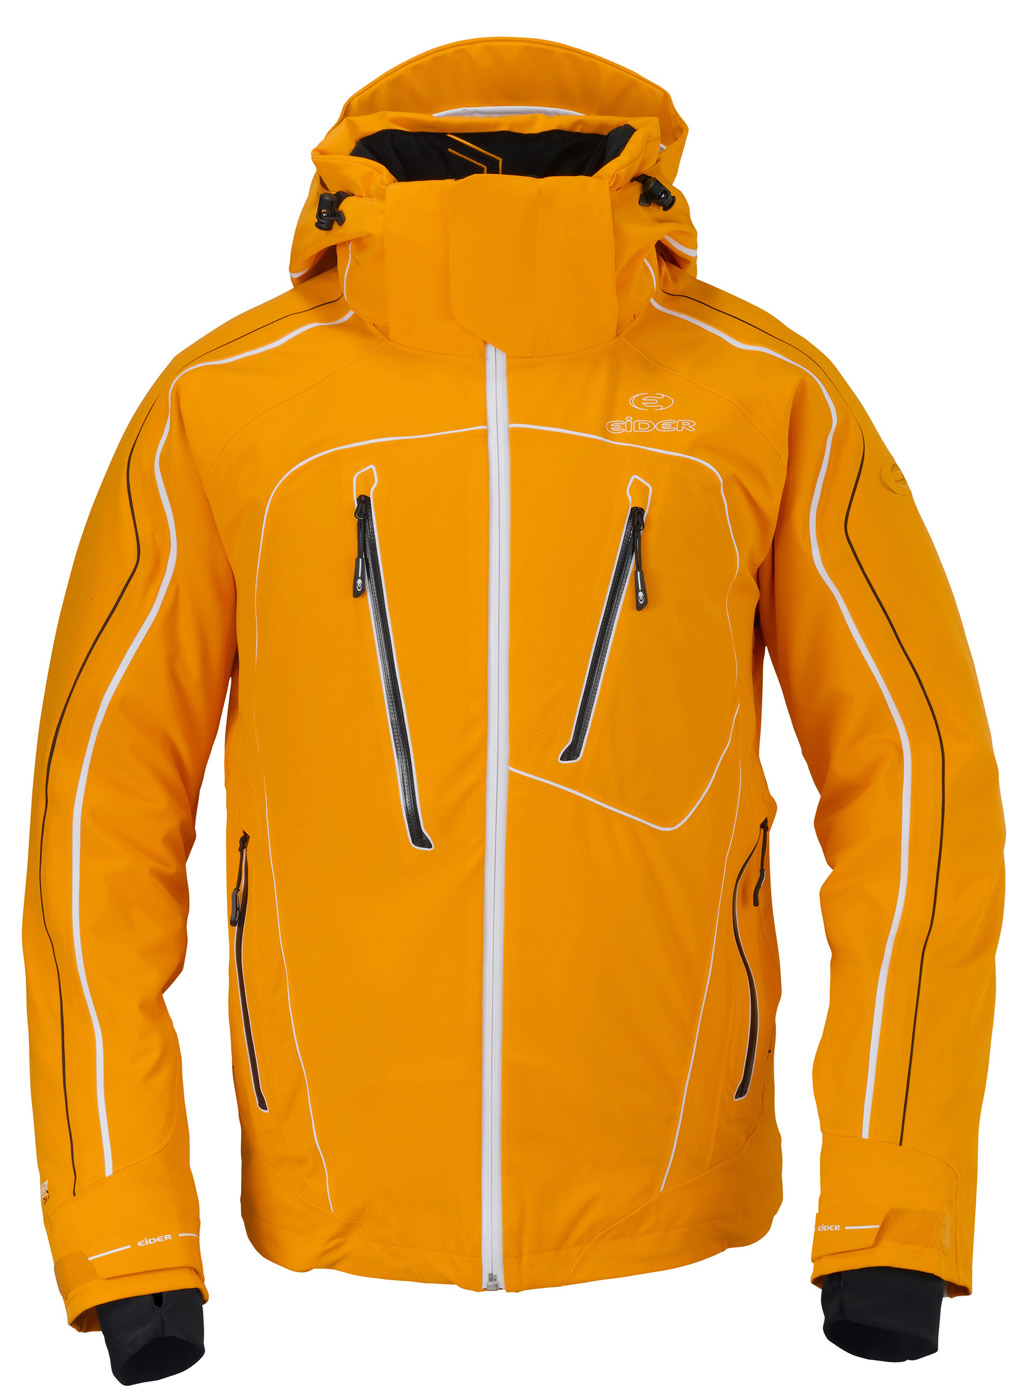 Photo of the Eider Niseko Jacket, Blister Gear Review.